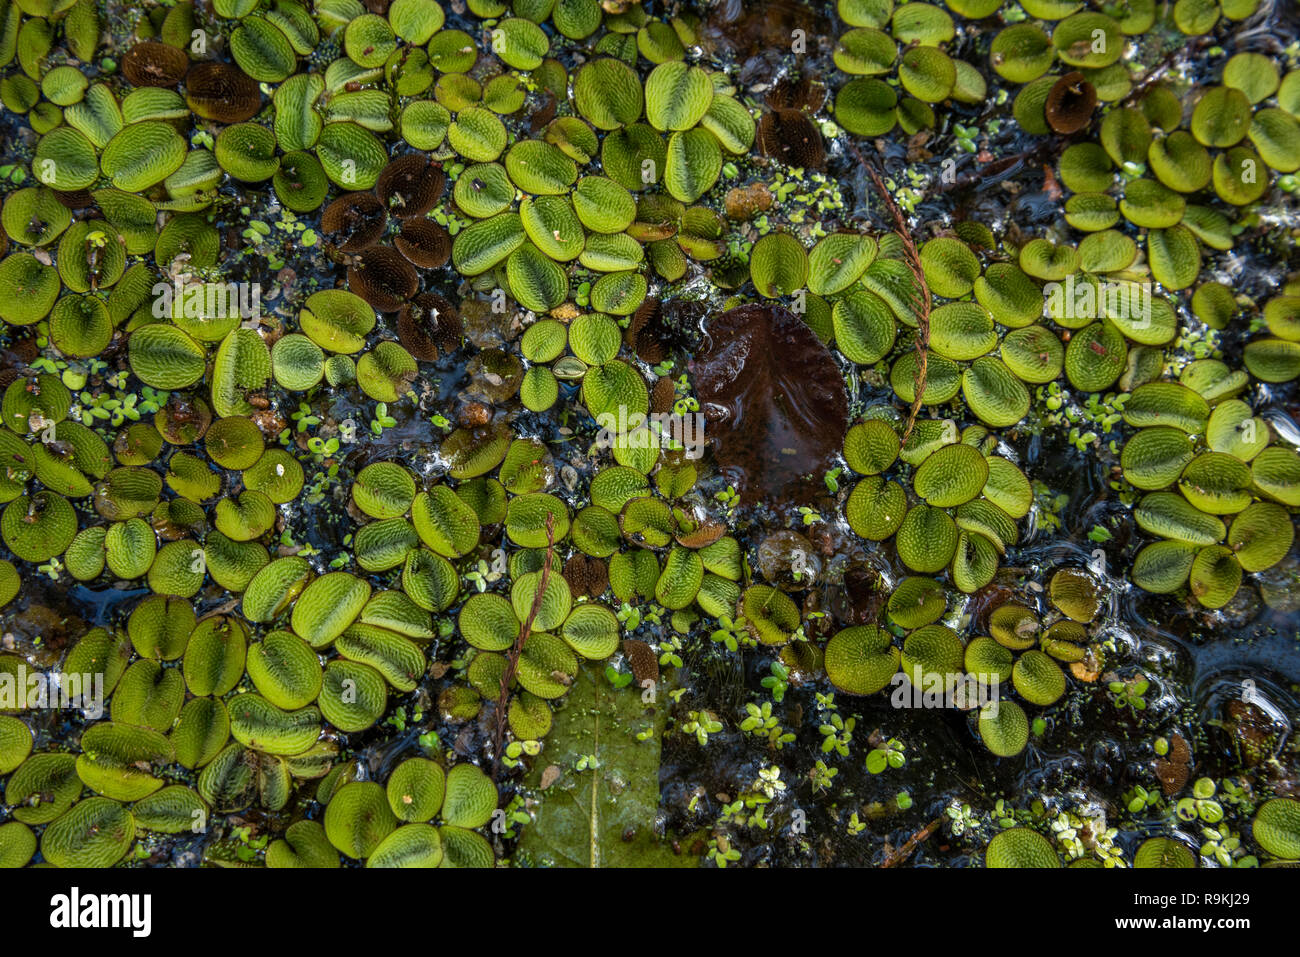 Salvinia minima is a species of aquatic, floating fern that grows on the surface of still waterways. It is usually referred to as common salvinia or w Stock Photo